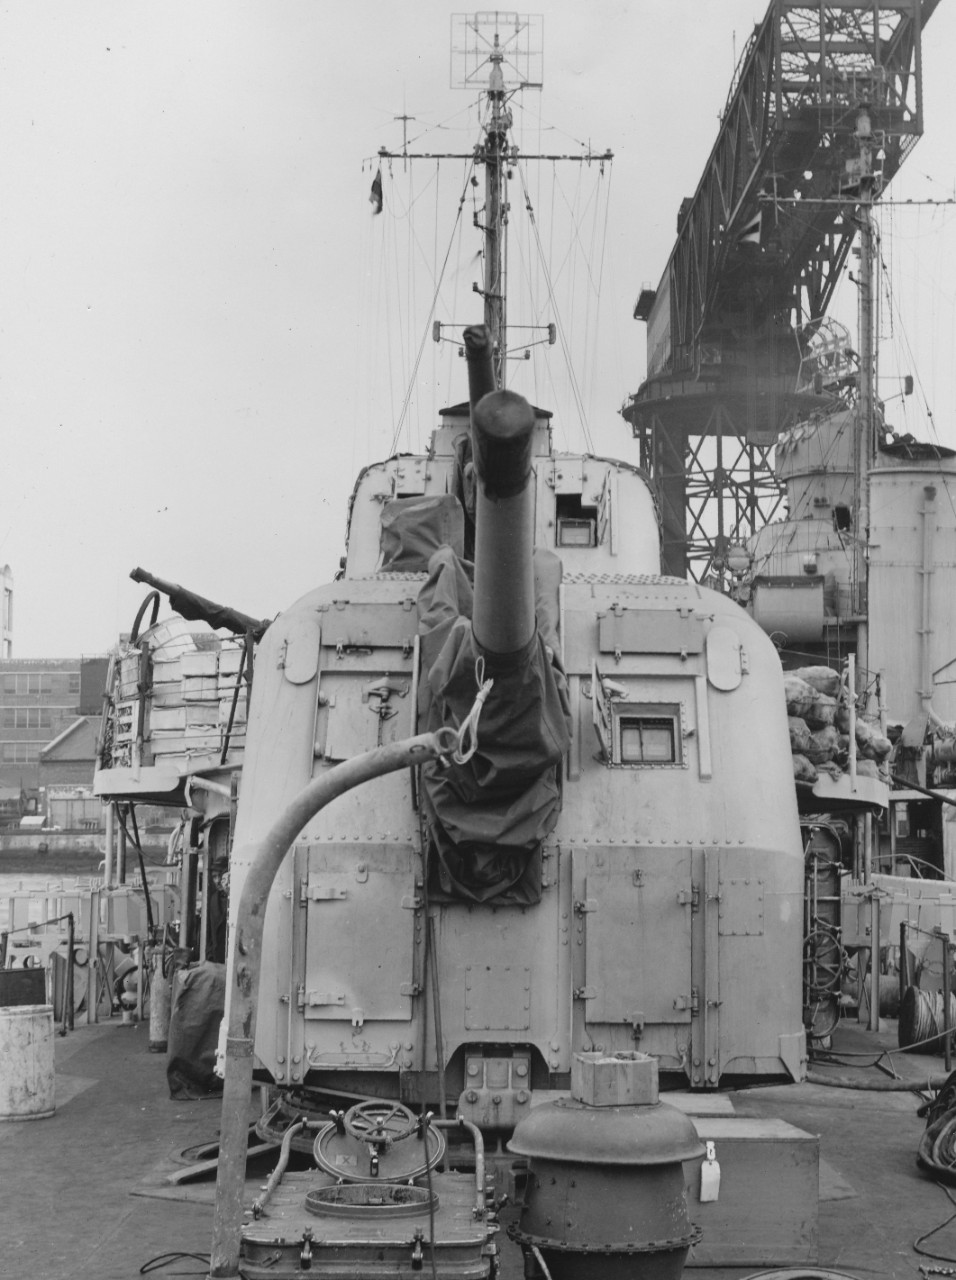 Looking forward from Rhind’s fantail during an availability at the New York Navy Yard, 30 November 1943. Note the unstowed provisions on the deck around Mt. 53, and the details of Mt. 54 in the foreground. (U.S. Navy Bureau of Ships Photograph BS-55790, National Archives and Records Administration, Still Pictures Division, College Park, Md.)